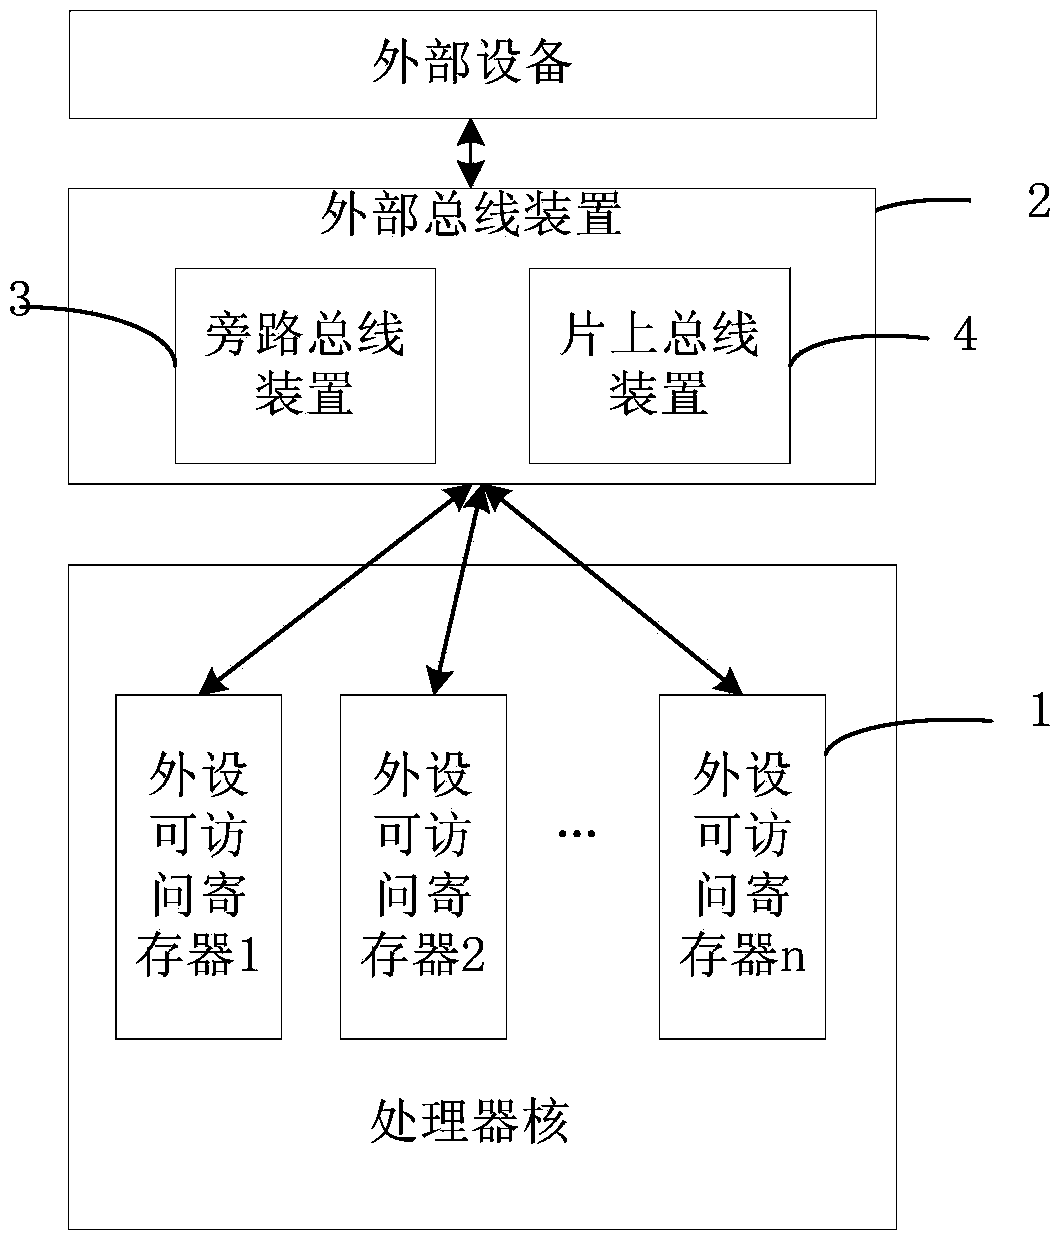 Data transmission system and method based on external device and accessible registers